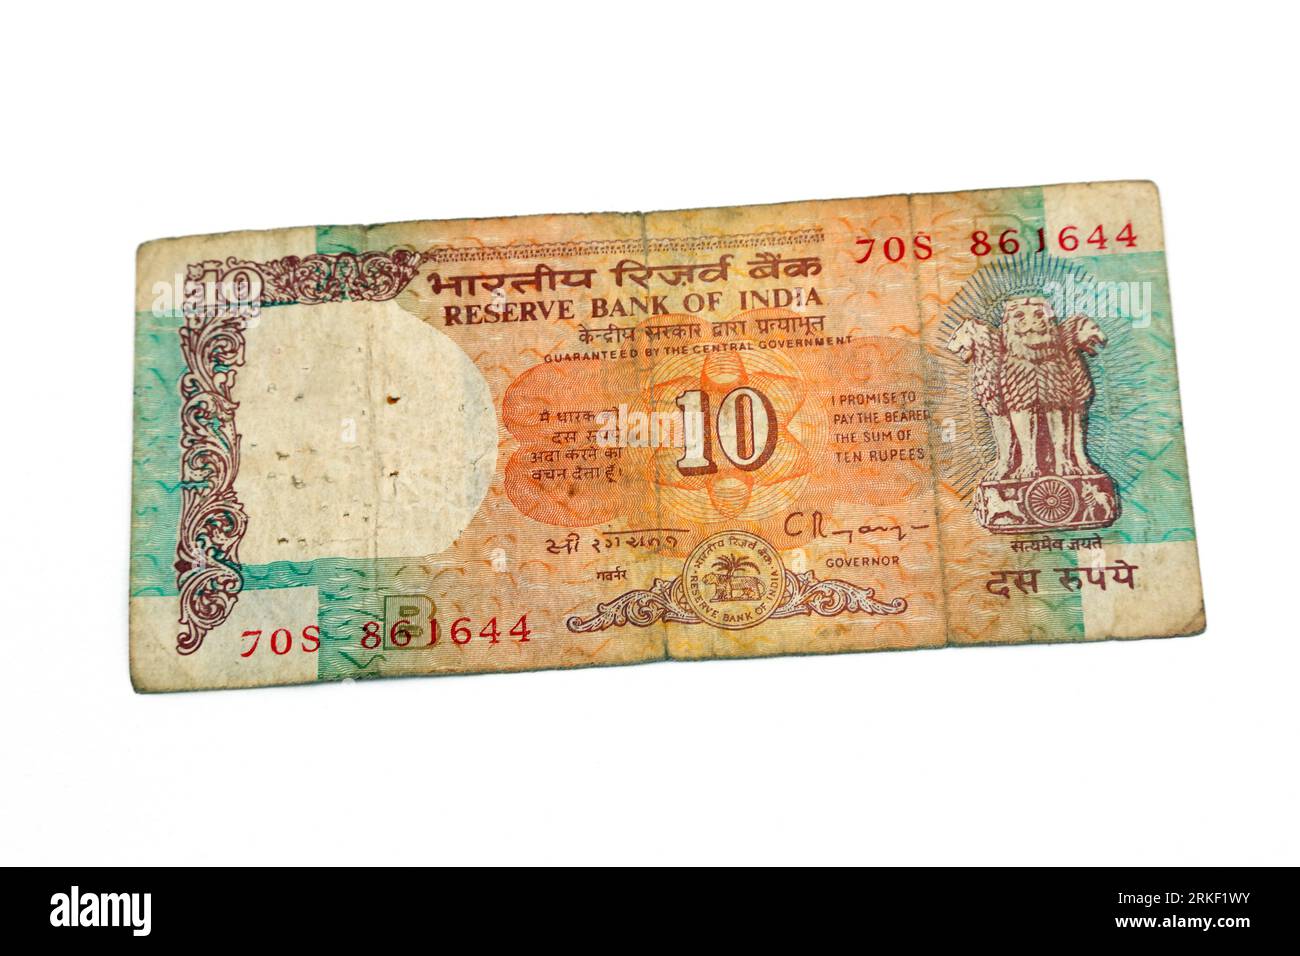 Reserve Bank of India Lion Capital Series Banknotes II - 10 Rupees Issued Obverse Side Showing the Lion Capitol of Ashoka Stock Photo